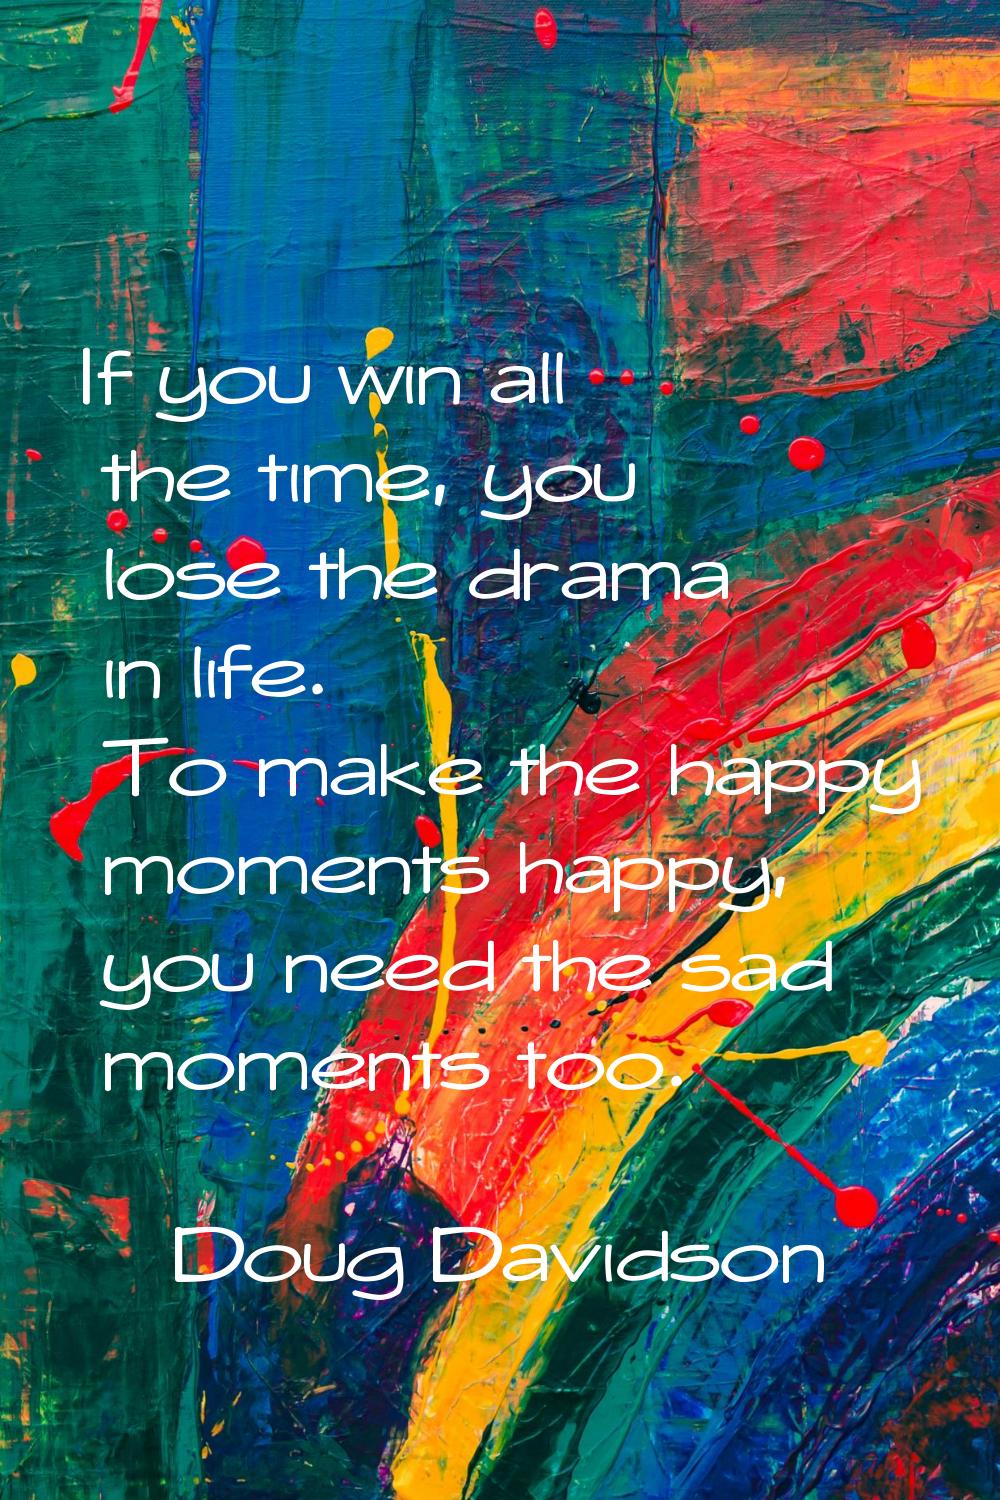 If you win all the time, you lose the drama in life. To make the happy moments happy, you need the 